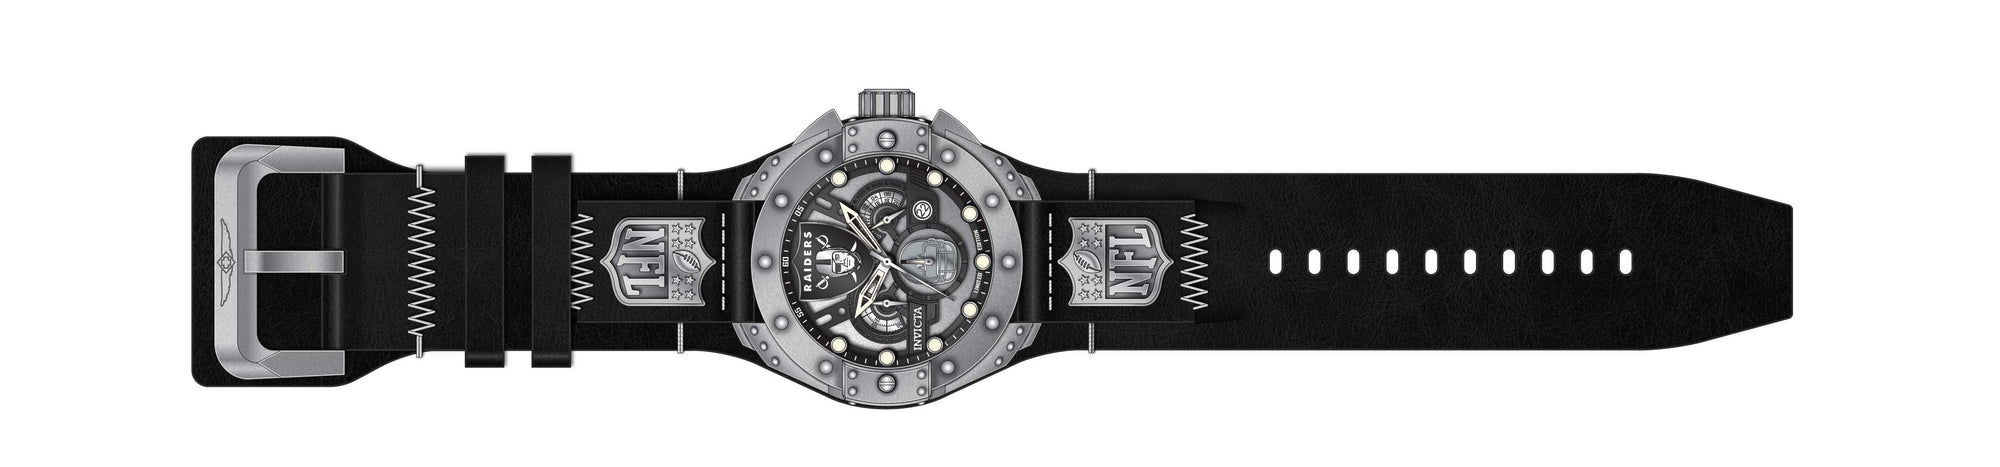 Band For Invicta NFL 45116